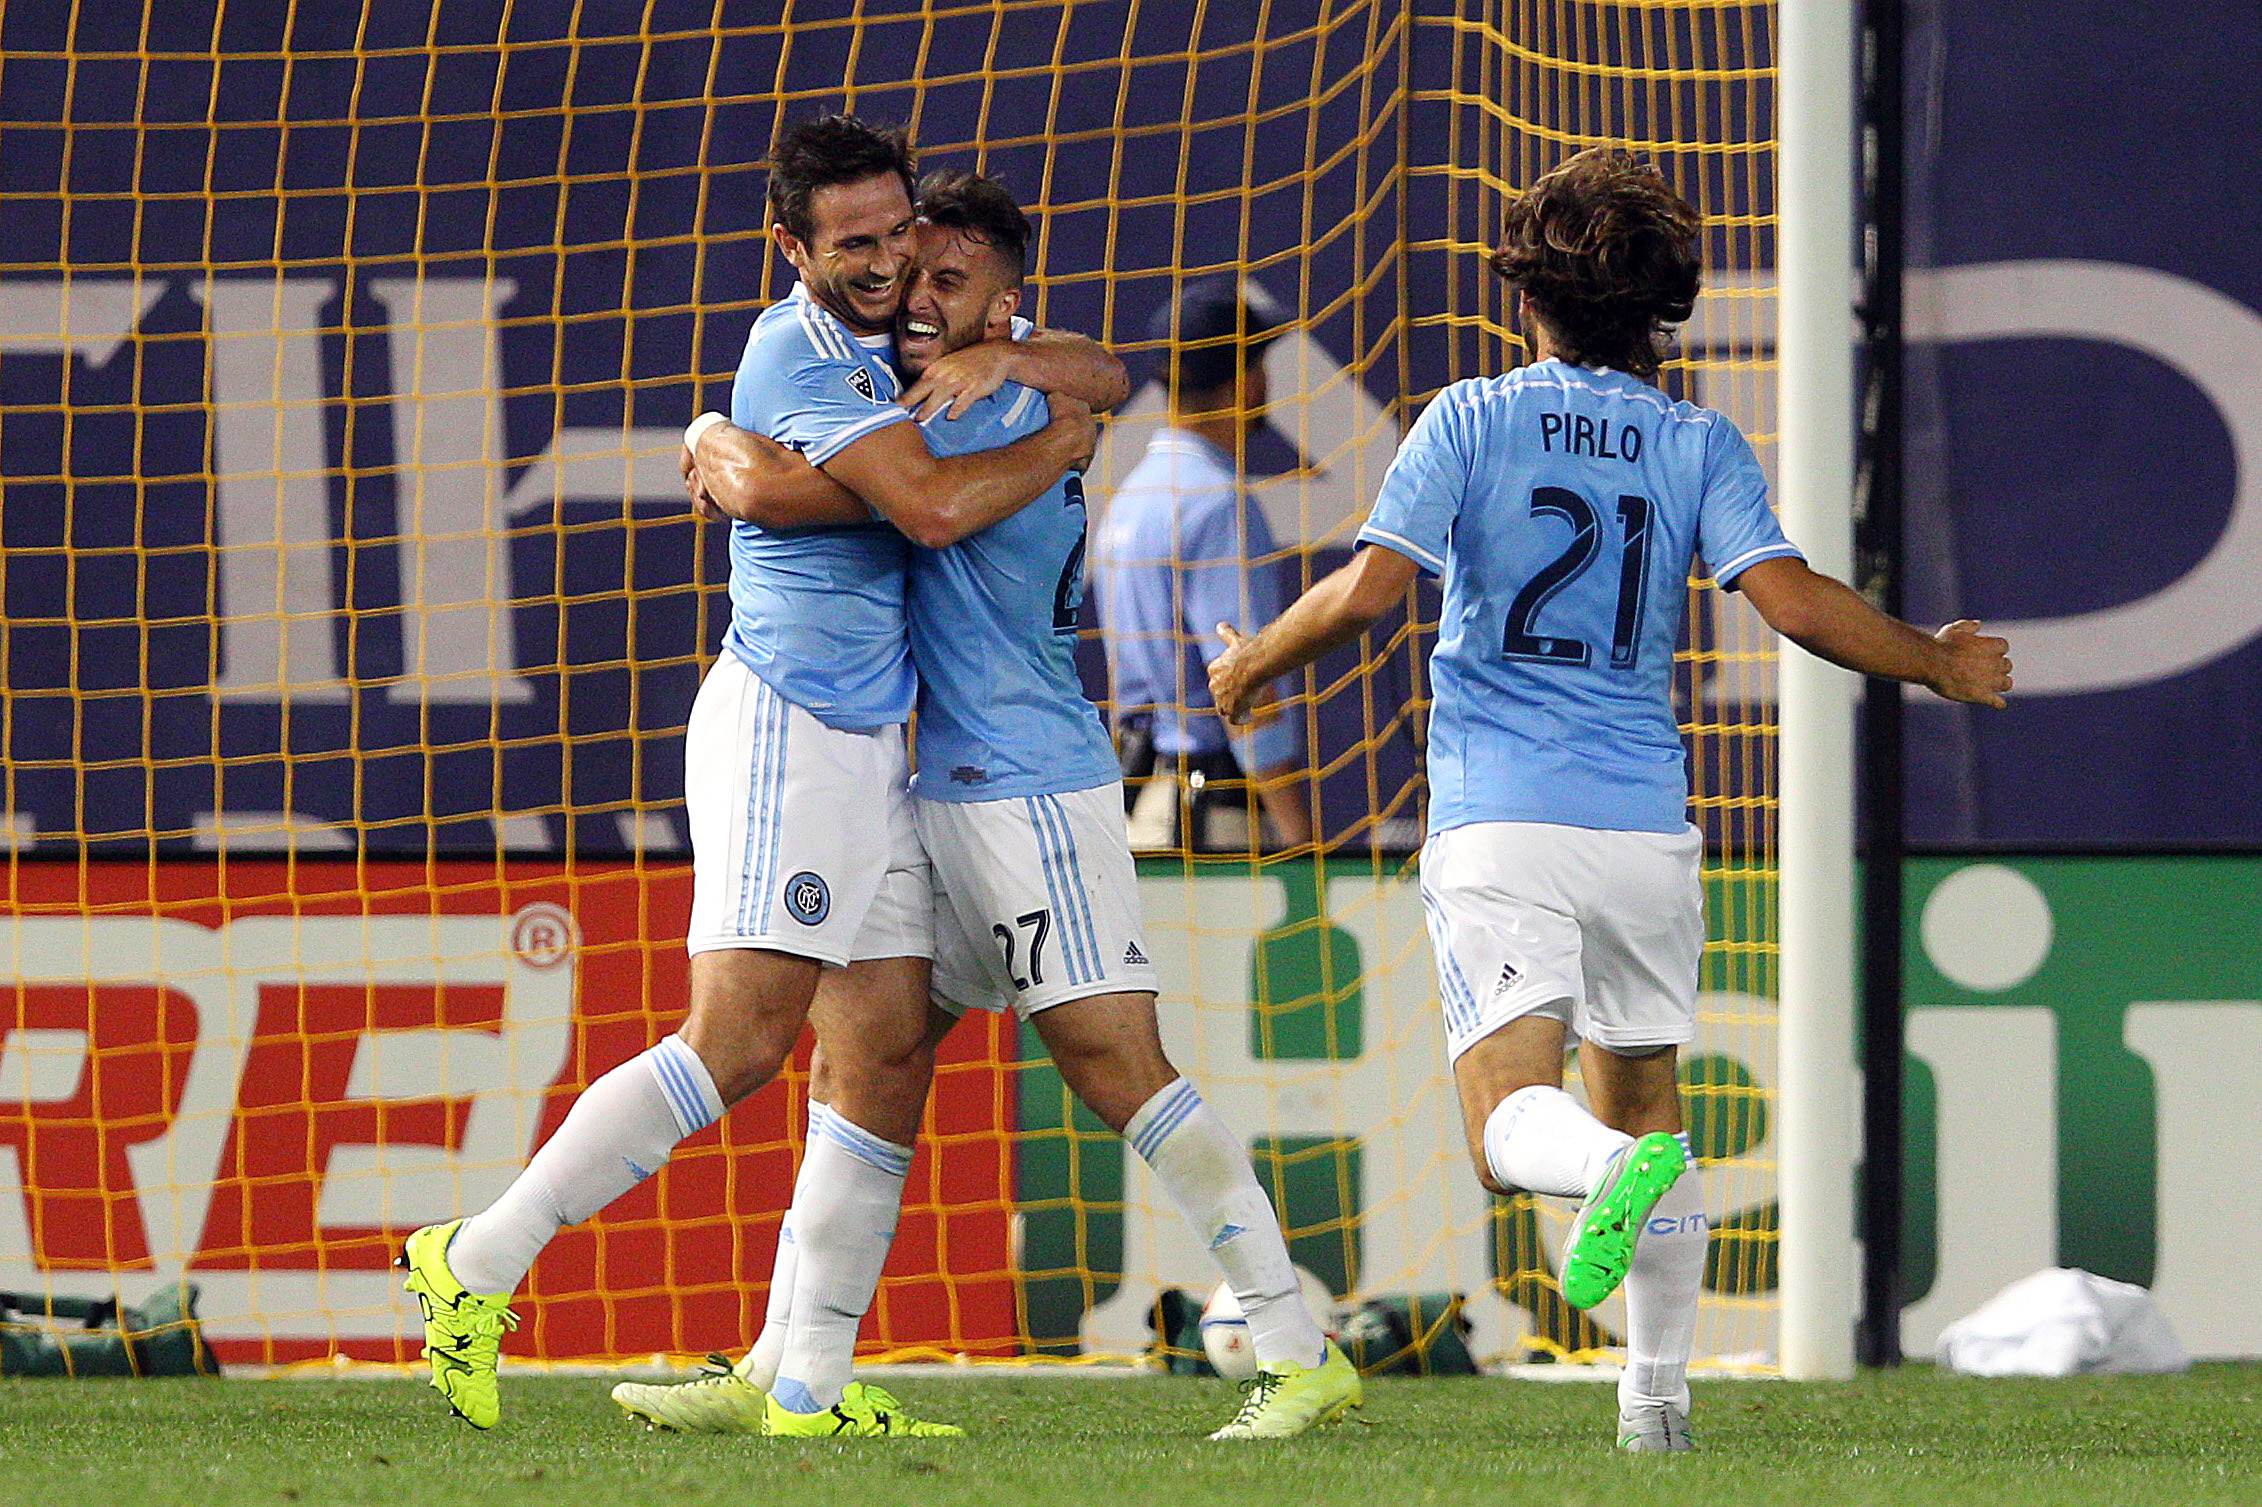 Sep 16, 2015; New York, NY, USA; New York City FC midfielder Frank Lampard (8) and New York City FC defender R.J. Allen (27) and New York City FC midfielder Andrea Pirlo (21) celebrate Lampard's goal against Toronto FC during the first half at Yankee Stadium. Mandatory Credit: Brad Penner-USA TODAY Sports